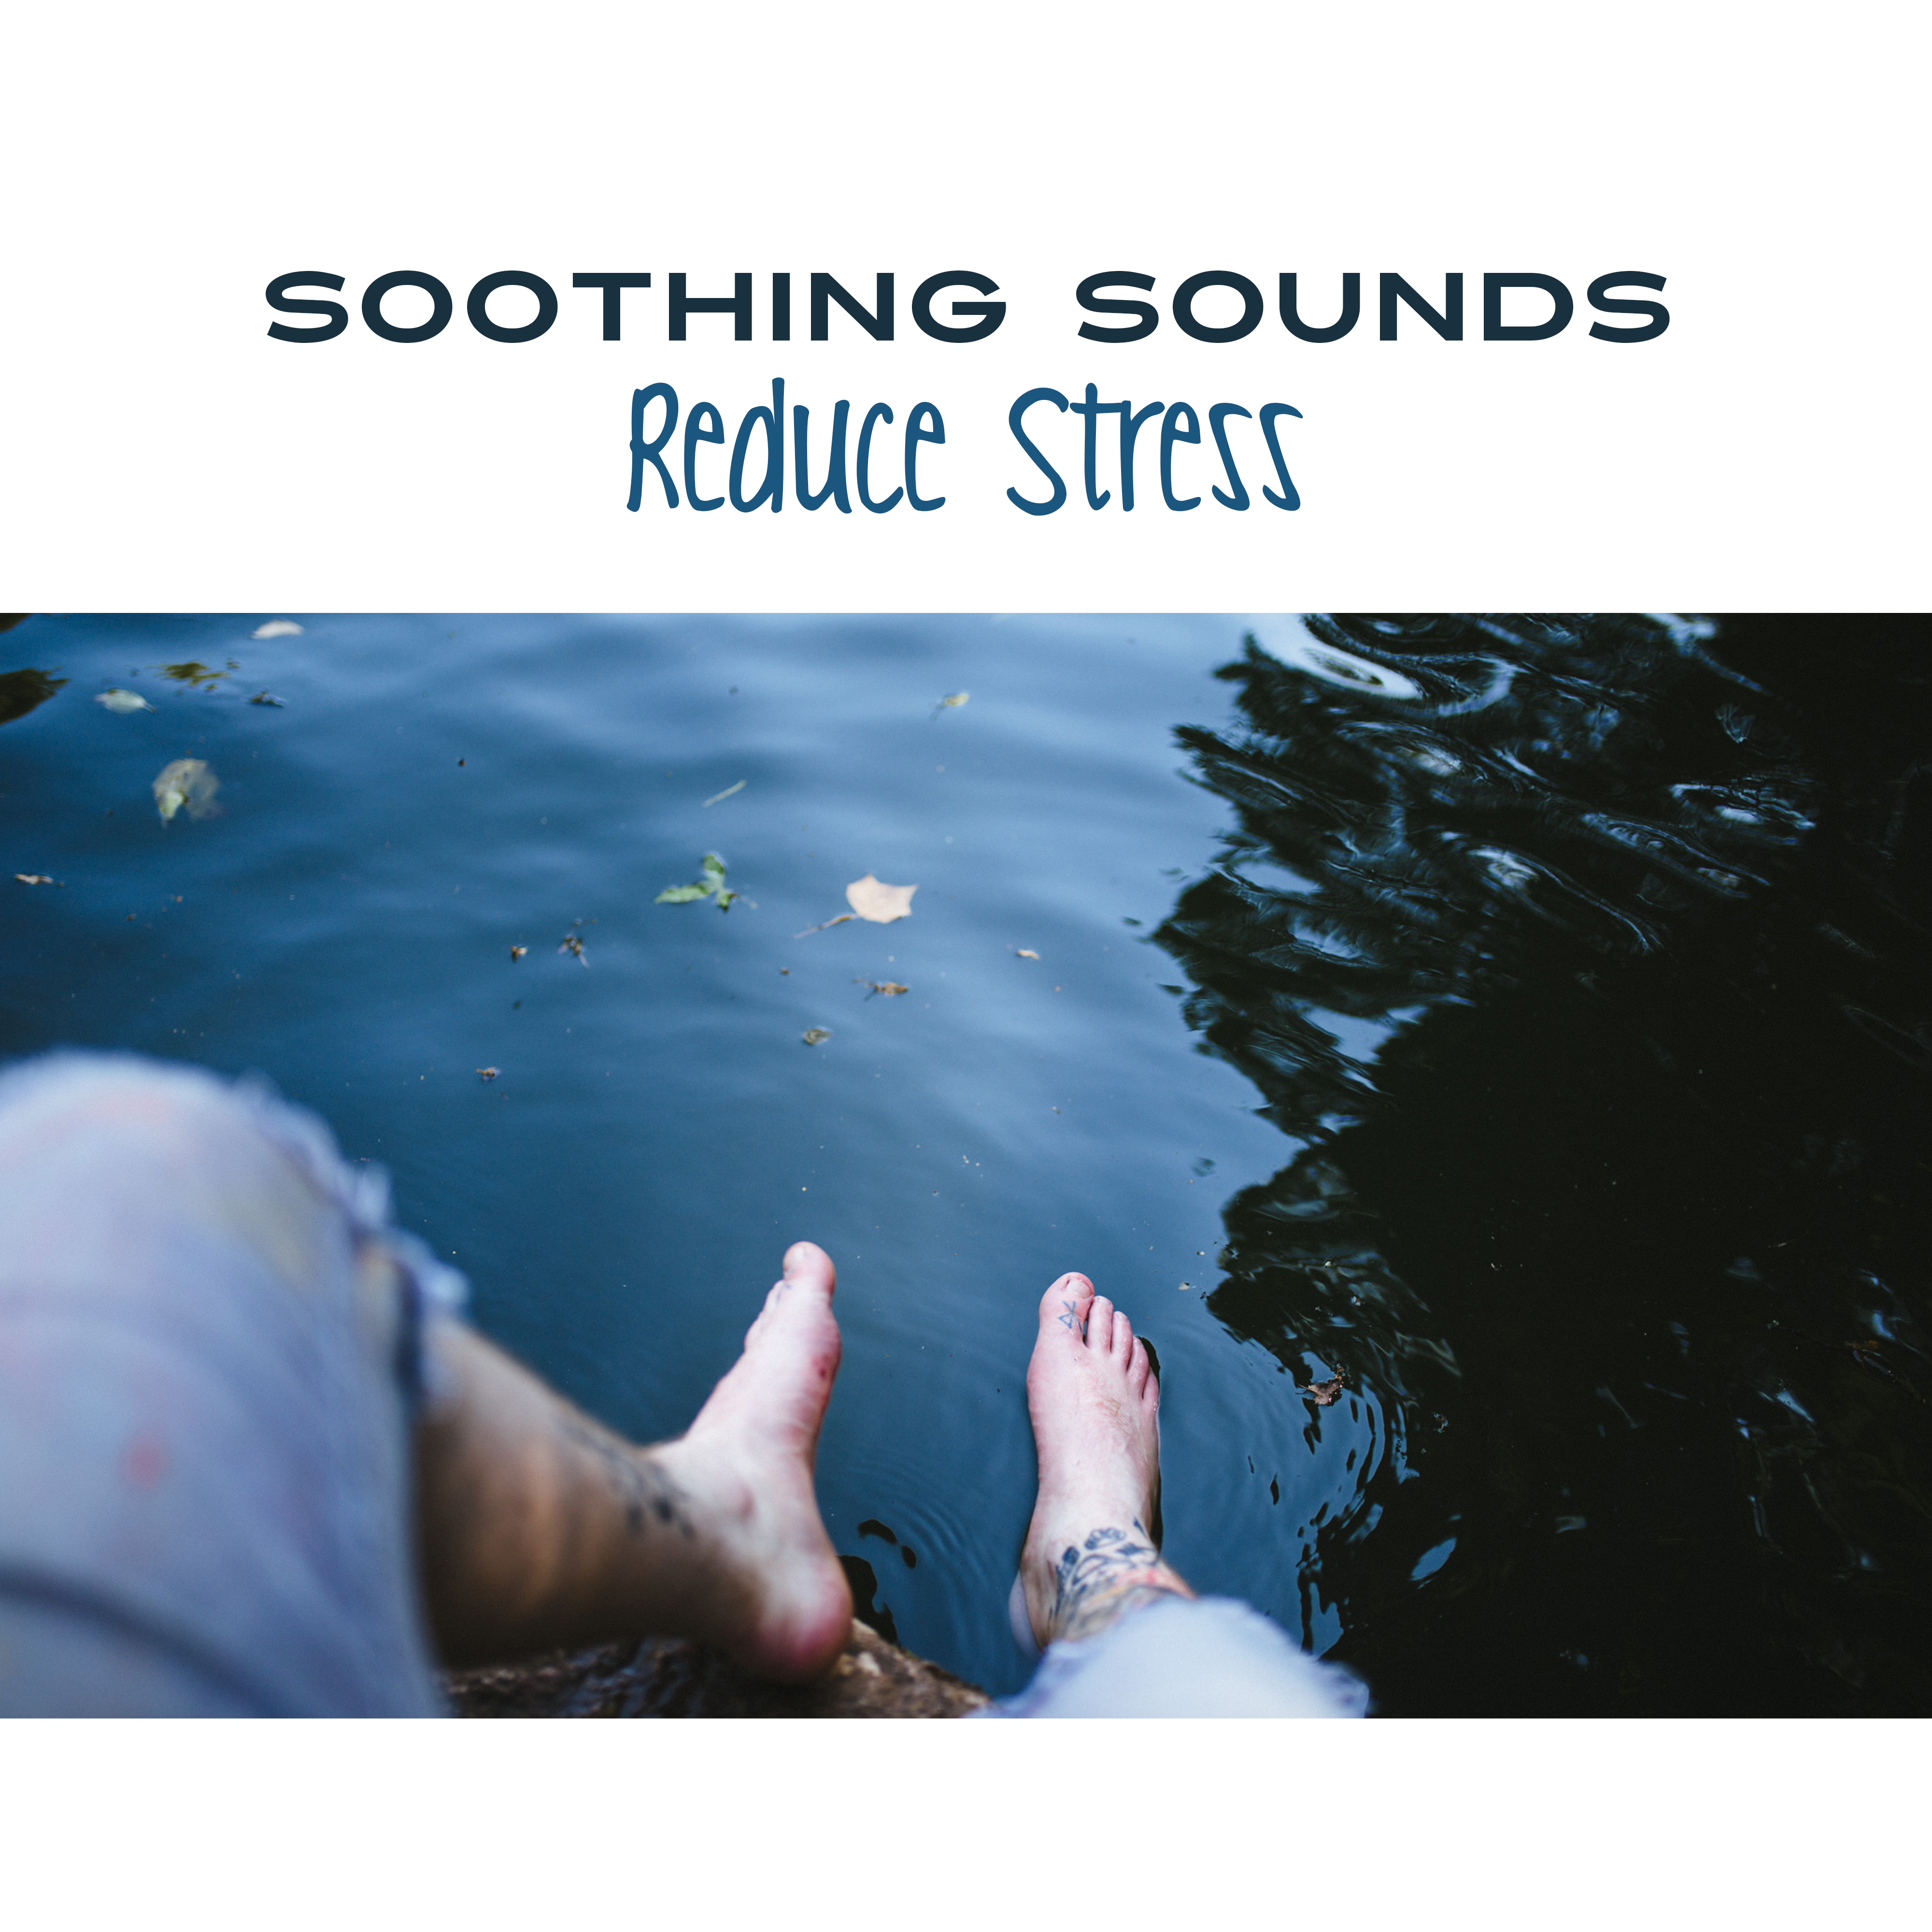 Soothing Sounds Reduce Stress  Pure Rest, Stress Relief, Peaceful Music for Relaxation, Healing, Sleep, Tranquility, Calm Down, Meditation